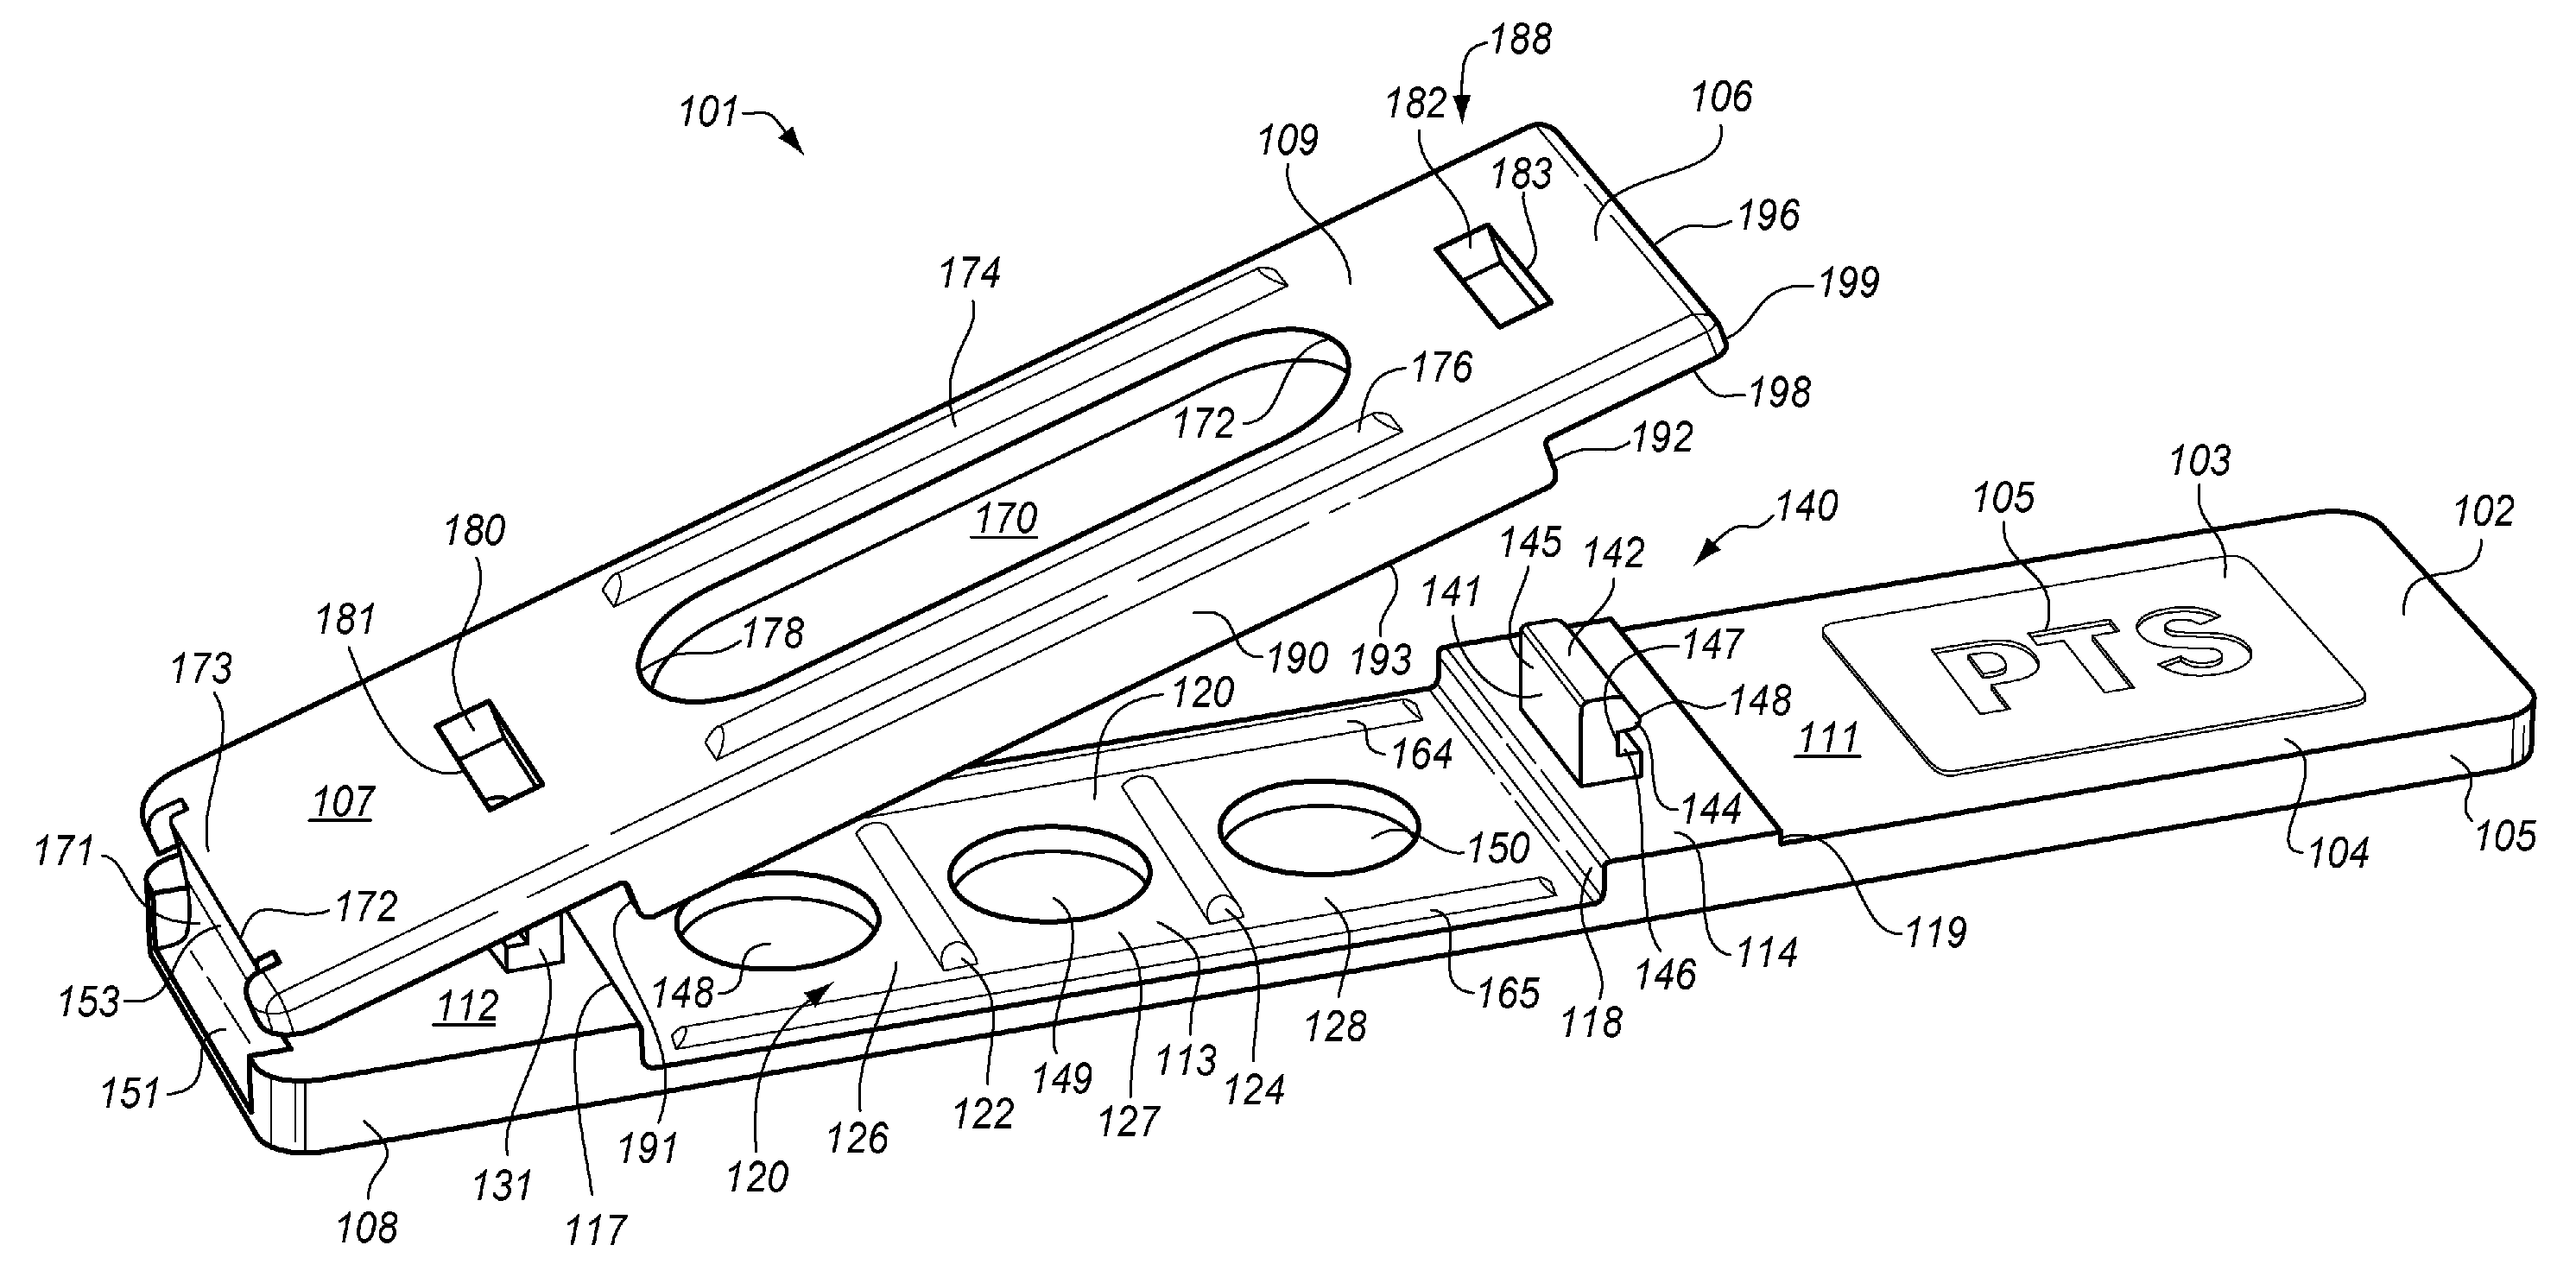 Dry test strip with controlled flow and method of manufacturing same